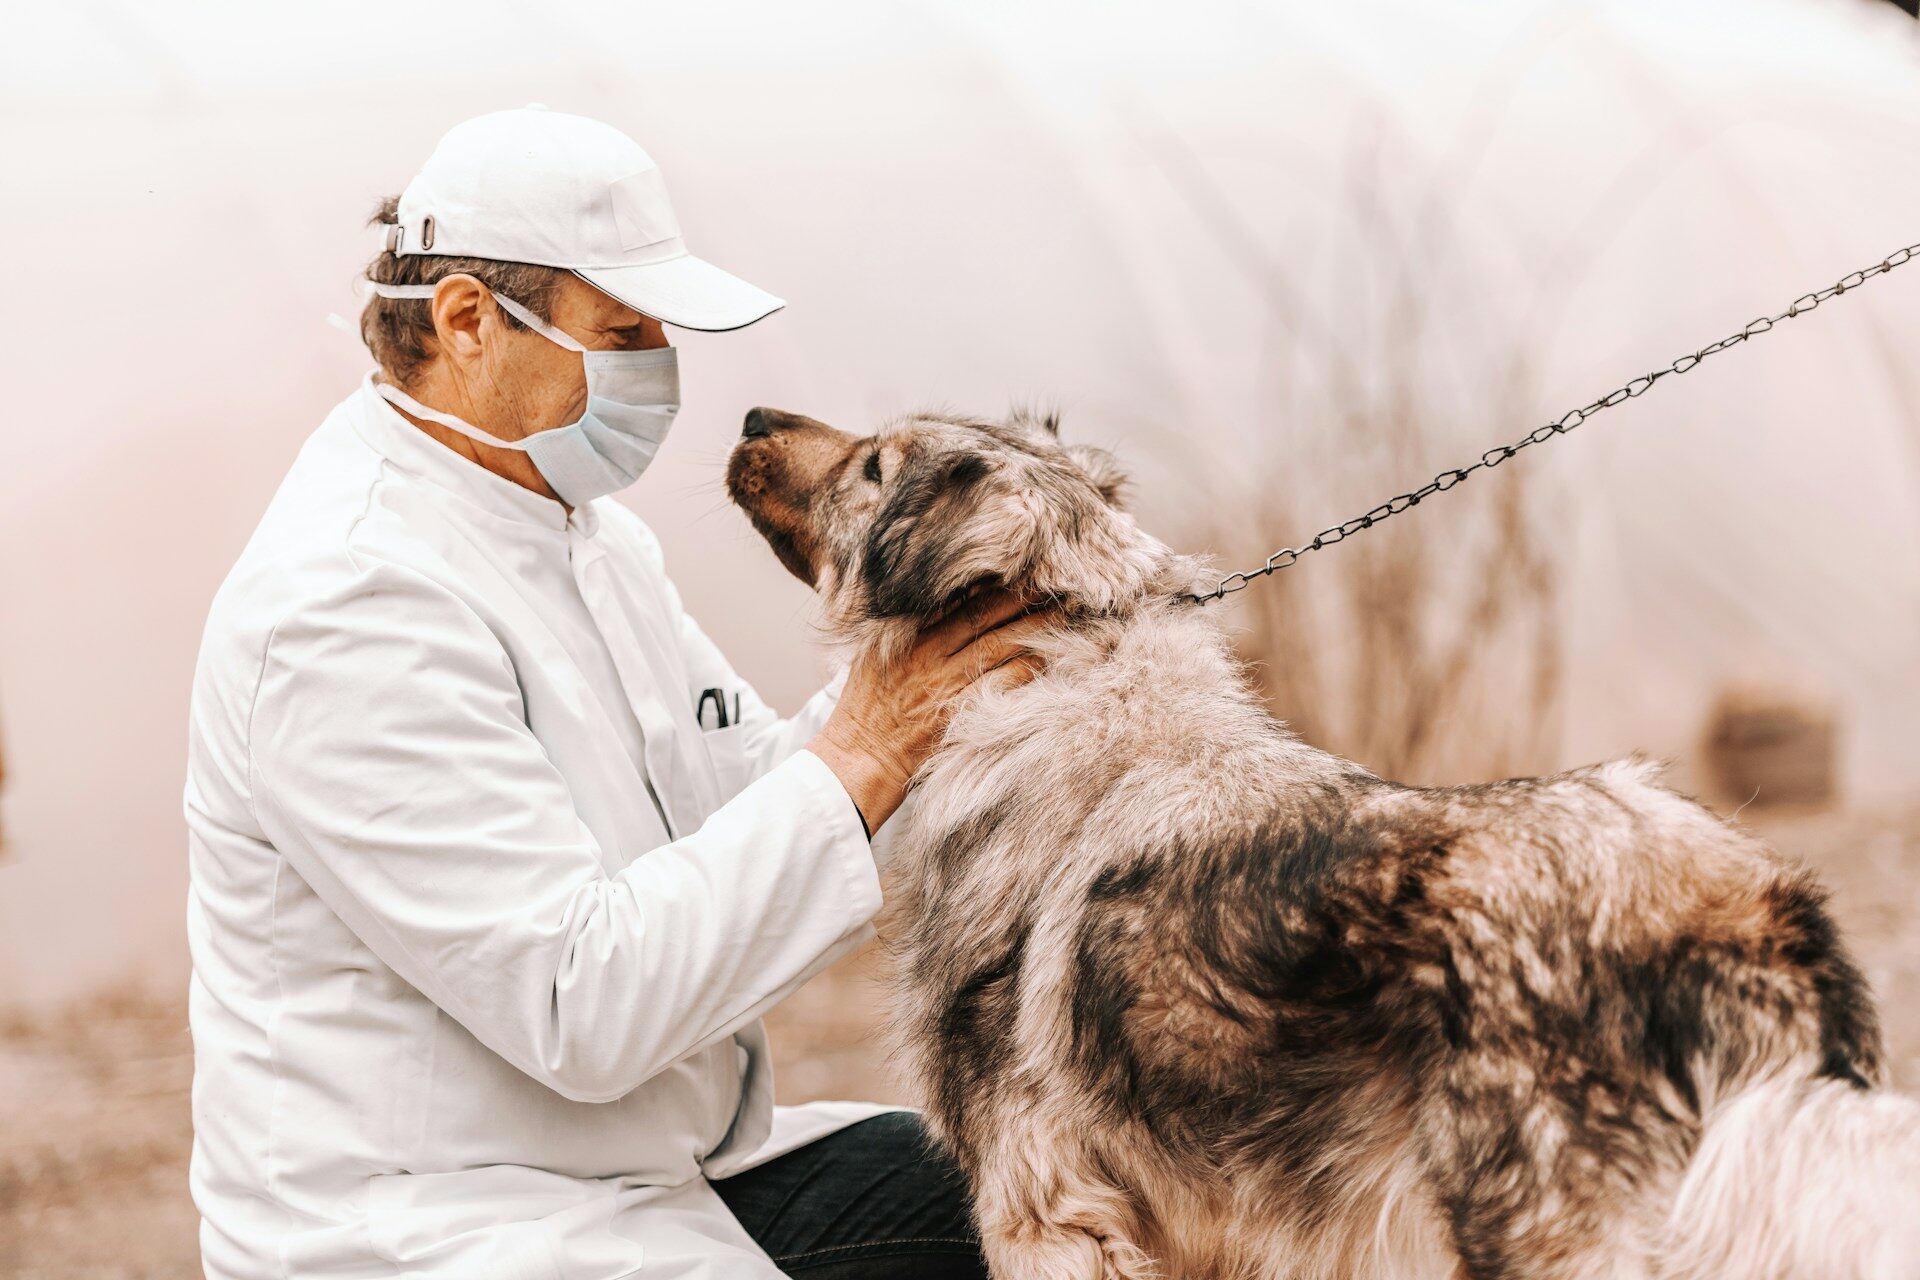 A vet wearing a mask inspecting a dog on a leash